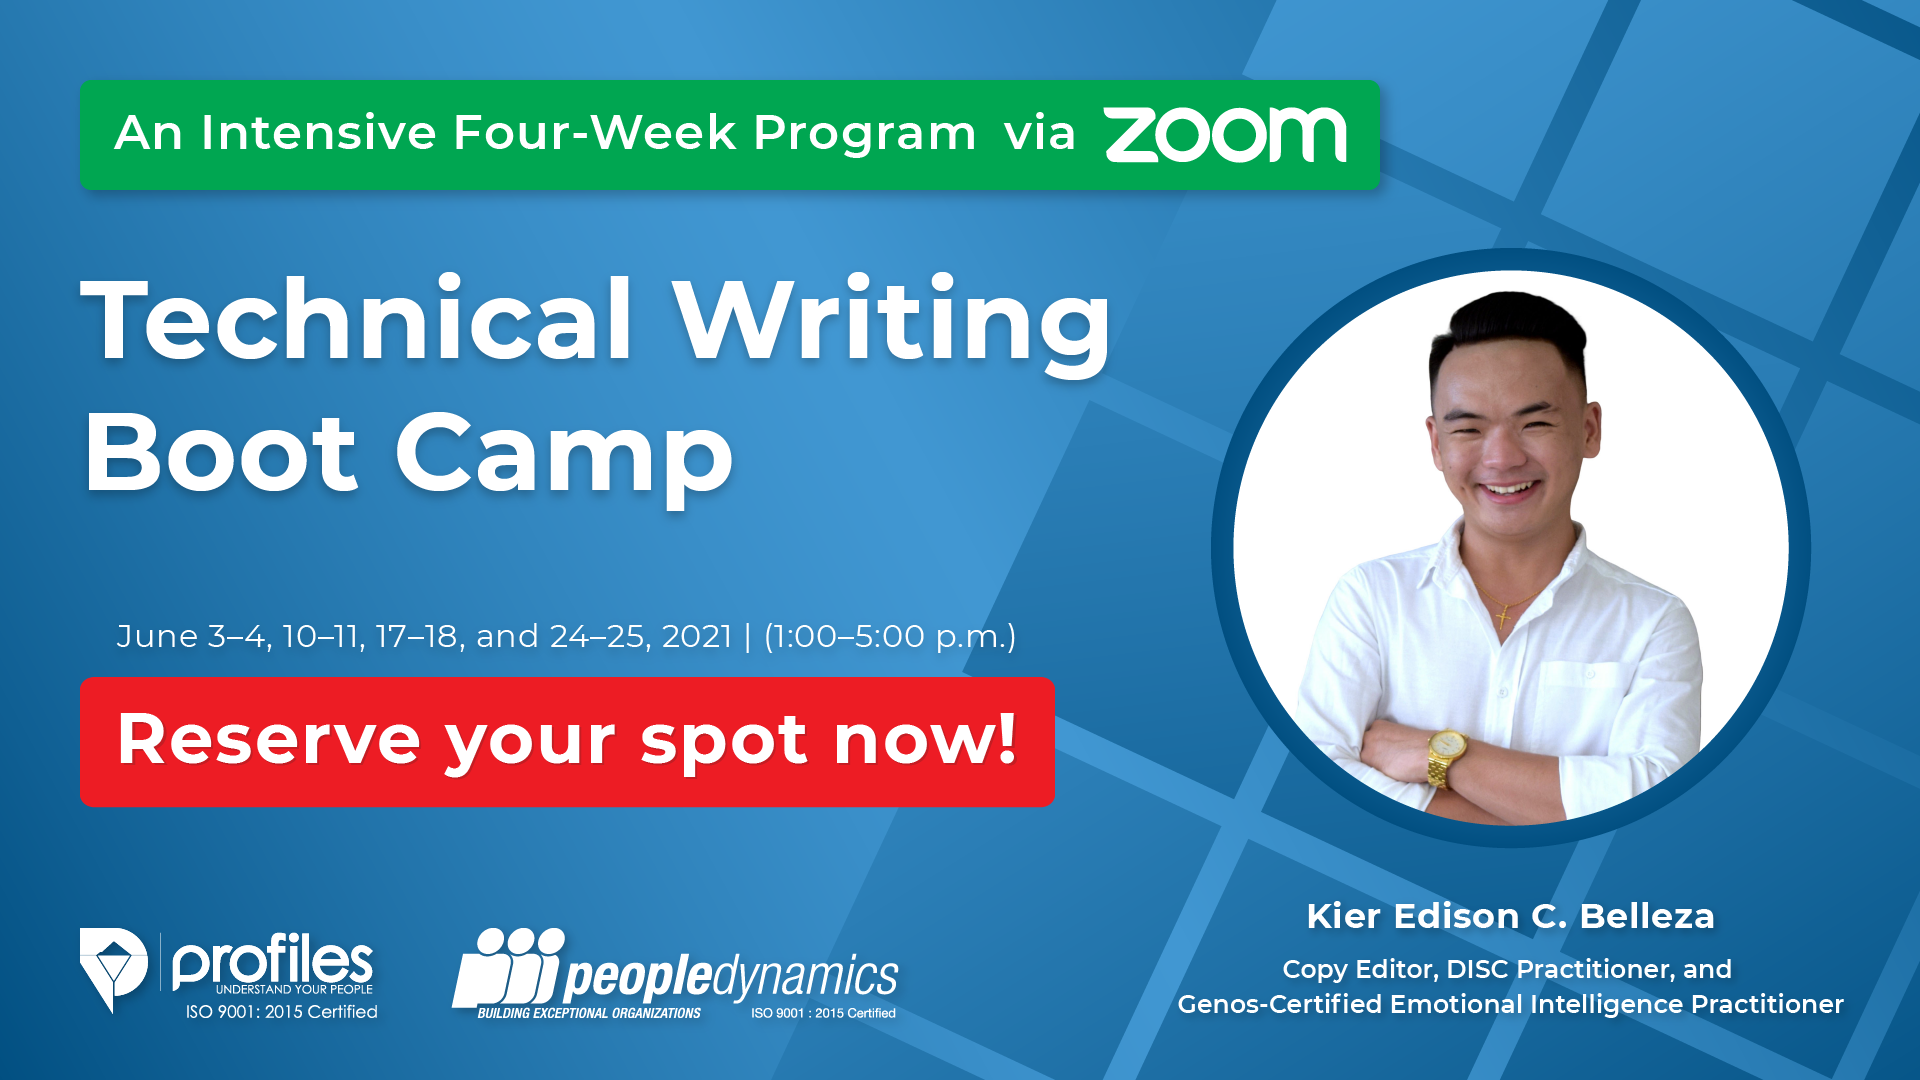 Technical Writing Boot Camp